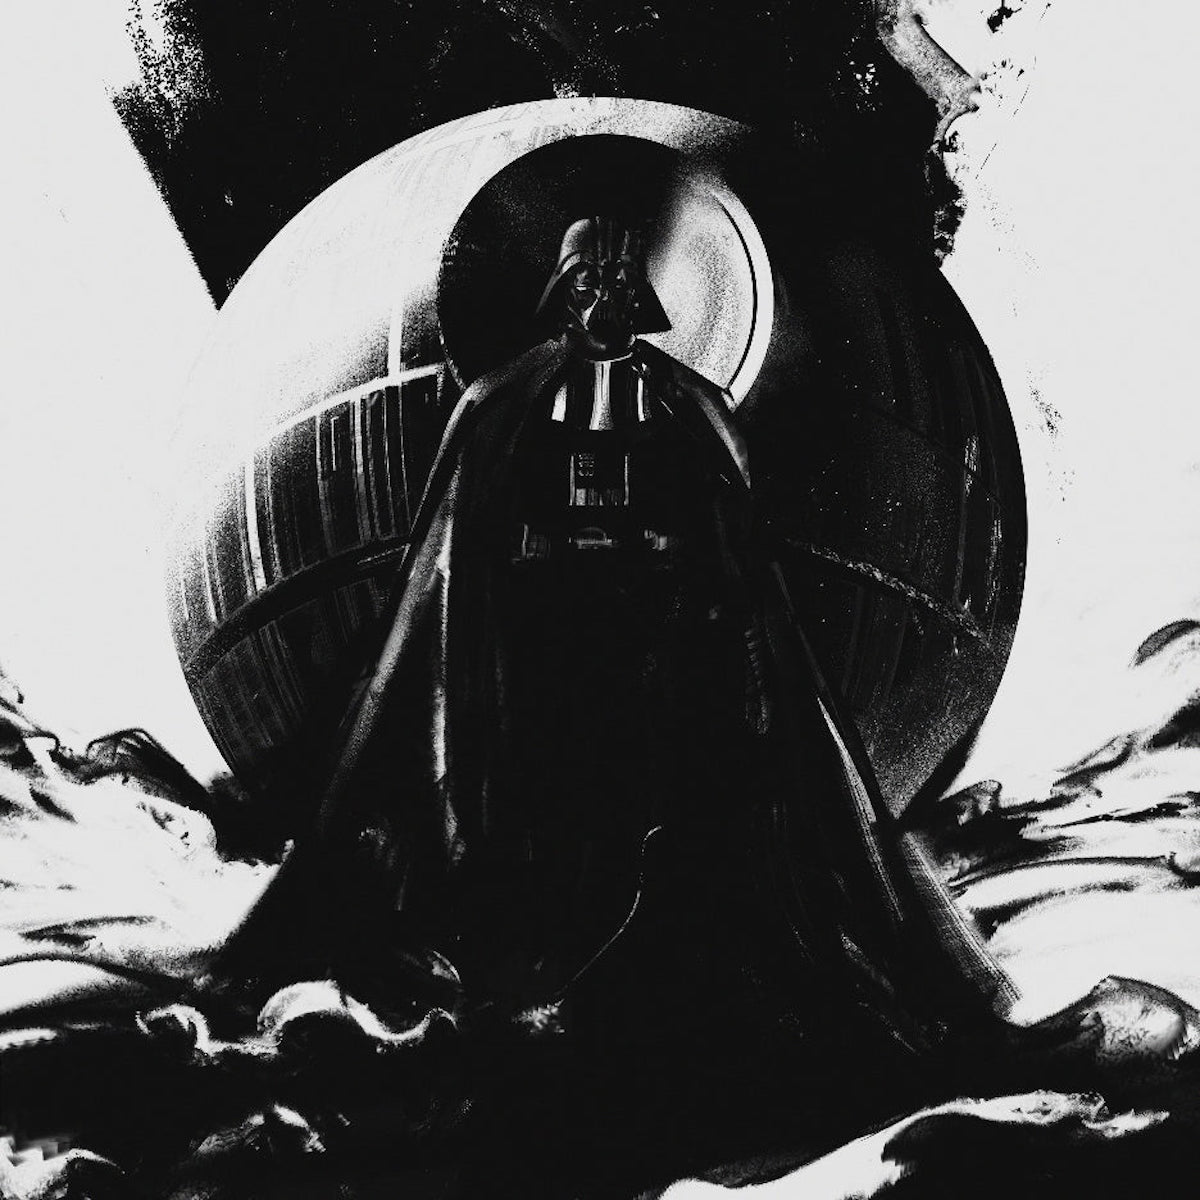 A black-and-white piece of art showing Darth Vader standing in front of the Death Star